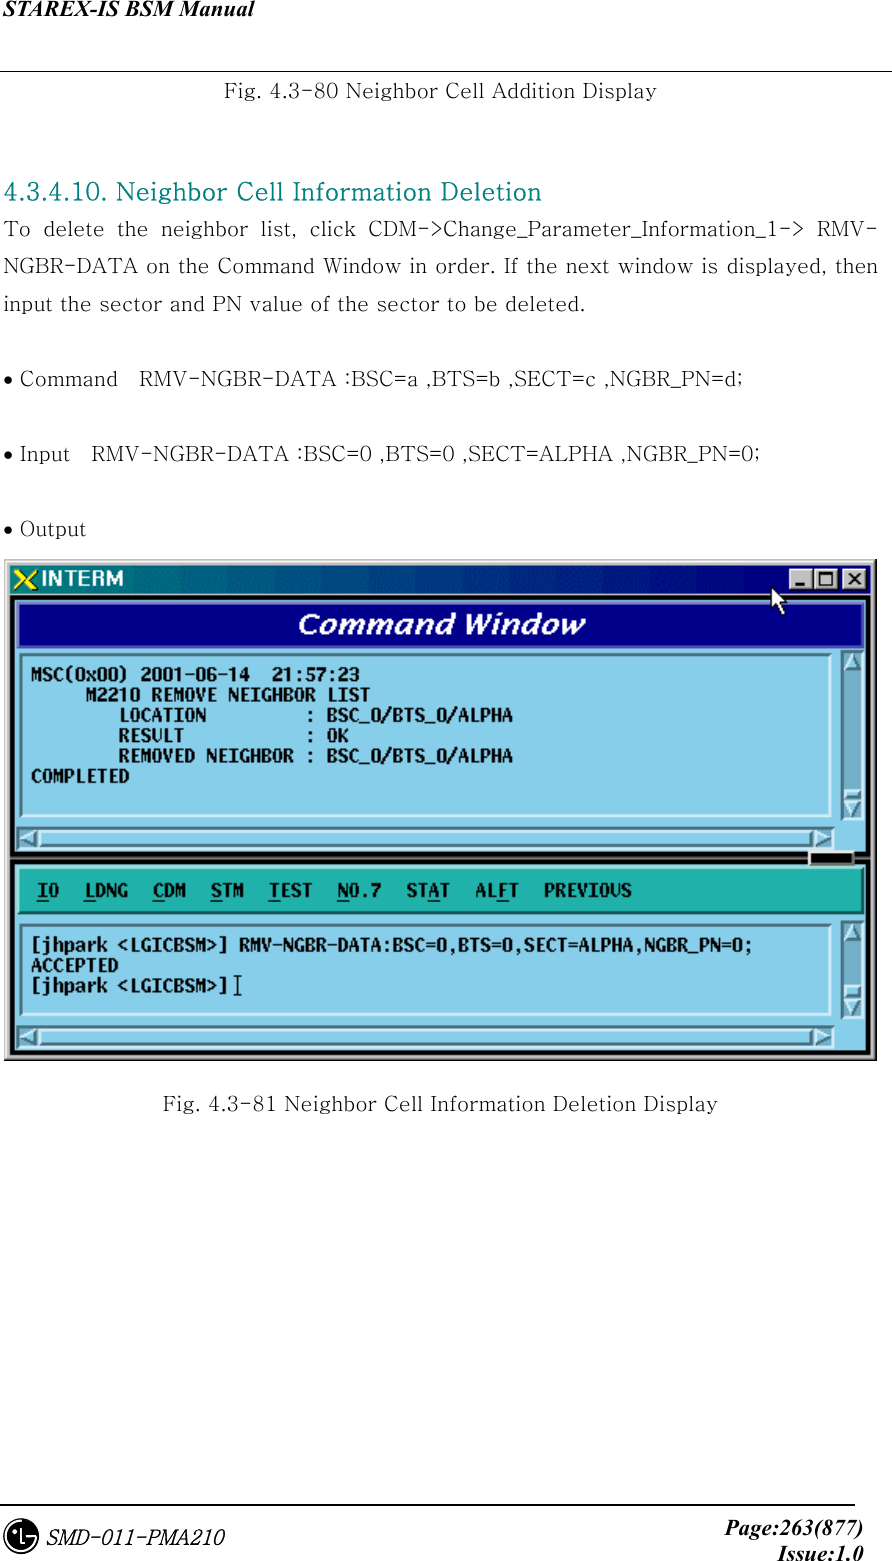 STAREX-IS BSM Manual     Page:263(877)Issue:1.0SMD-011-PMA210 Fig. 4.3-80 Neighbor Cell Addition Display  4.3.4.10. Neighbor Cell Information Deletion To  delete  the  neighbor  list,  click  CDM-&gt;Change_Parameter_Information_1-&gt;  RMV-NGBR-DATA on the Command Window in order. If the next window is displayed, then input the sector and PN value of the sector to be deleted.    • Command    RMV-NGBR-DATA :BSC=a ,BTS=b ,SECT=c ,NGBR_PN=d;  • Input    RMV-NGBR-DATA :BSC=0 ,BTS=0 ,SECT=ALPHA ,NGBR_PN=0;  • Output  Fig. 4.3-81 Neighbor Cell Information Deletion Display 